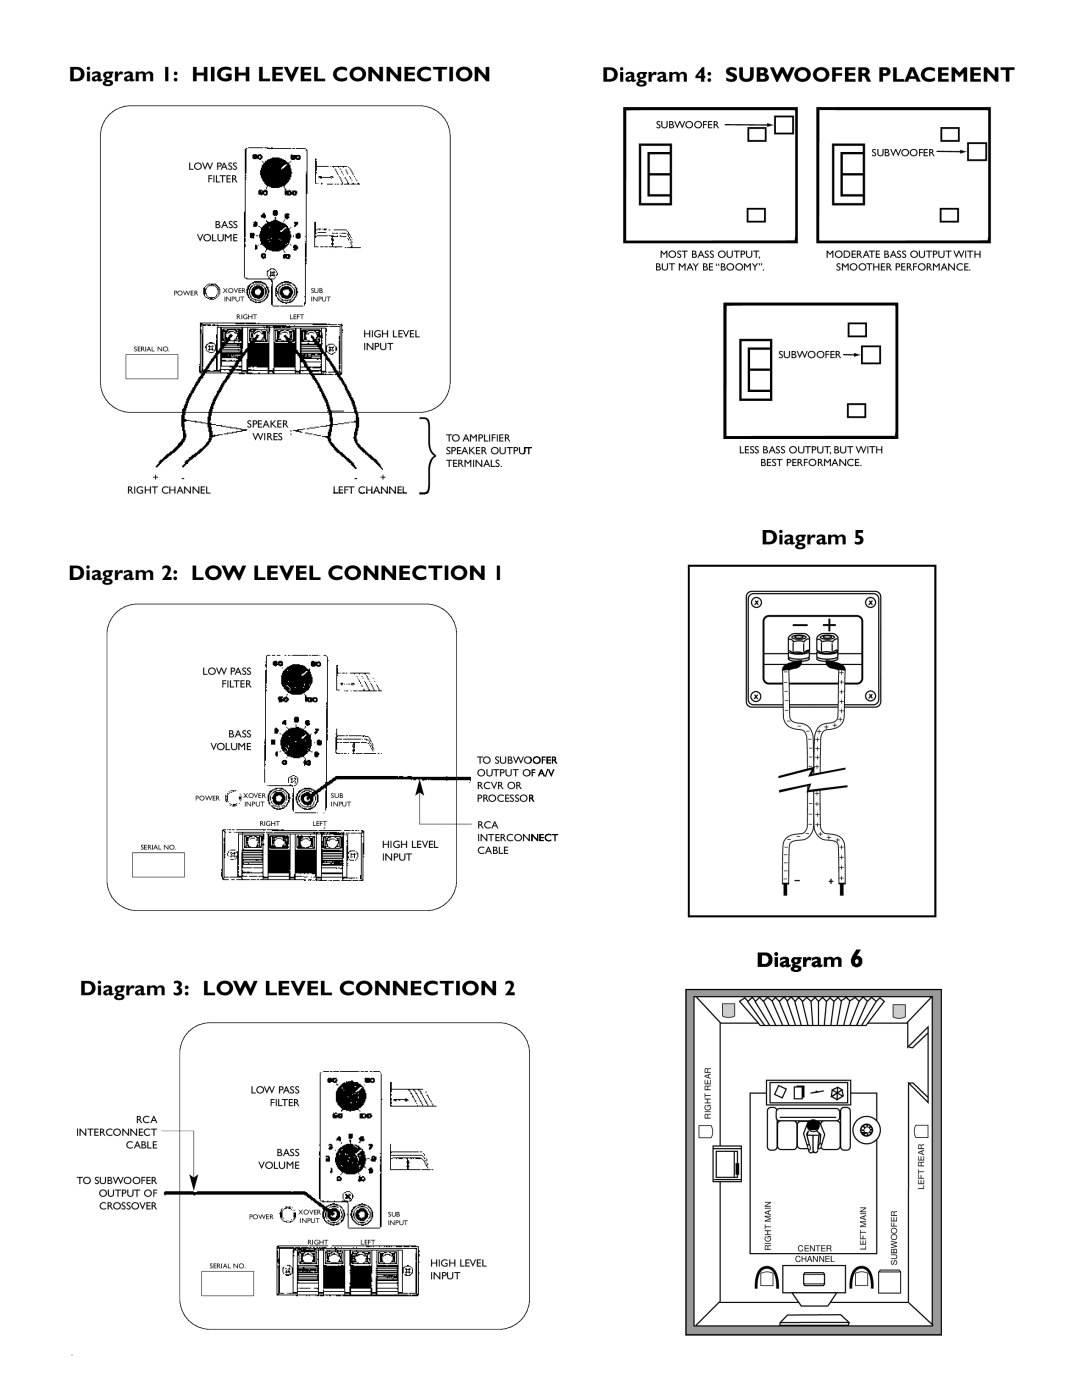 Energy Speaker Systems TAKE 5+1 owner manual Diagram 1: HIGH LEVEL CONNECTION, Diagram 4: SUBWOOFER PLACEMENT 